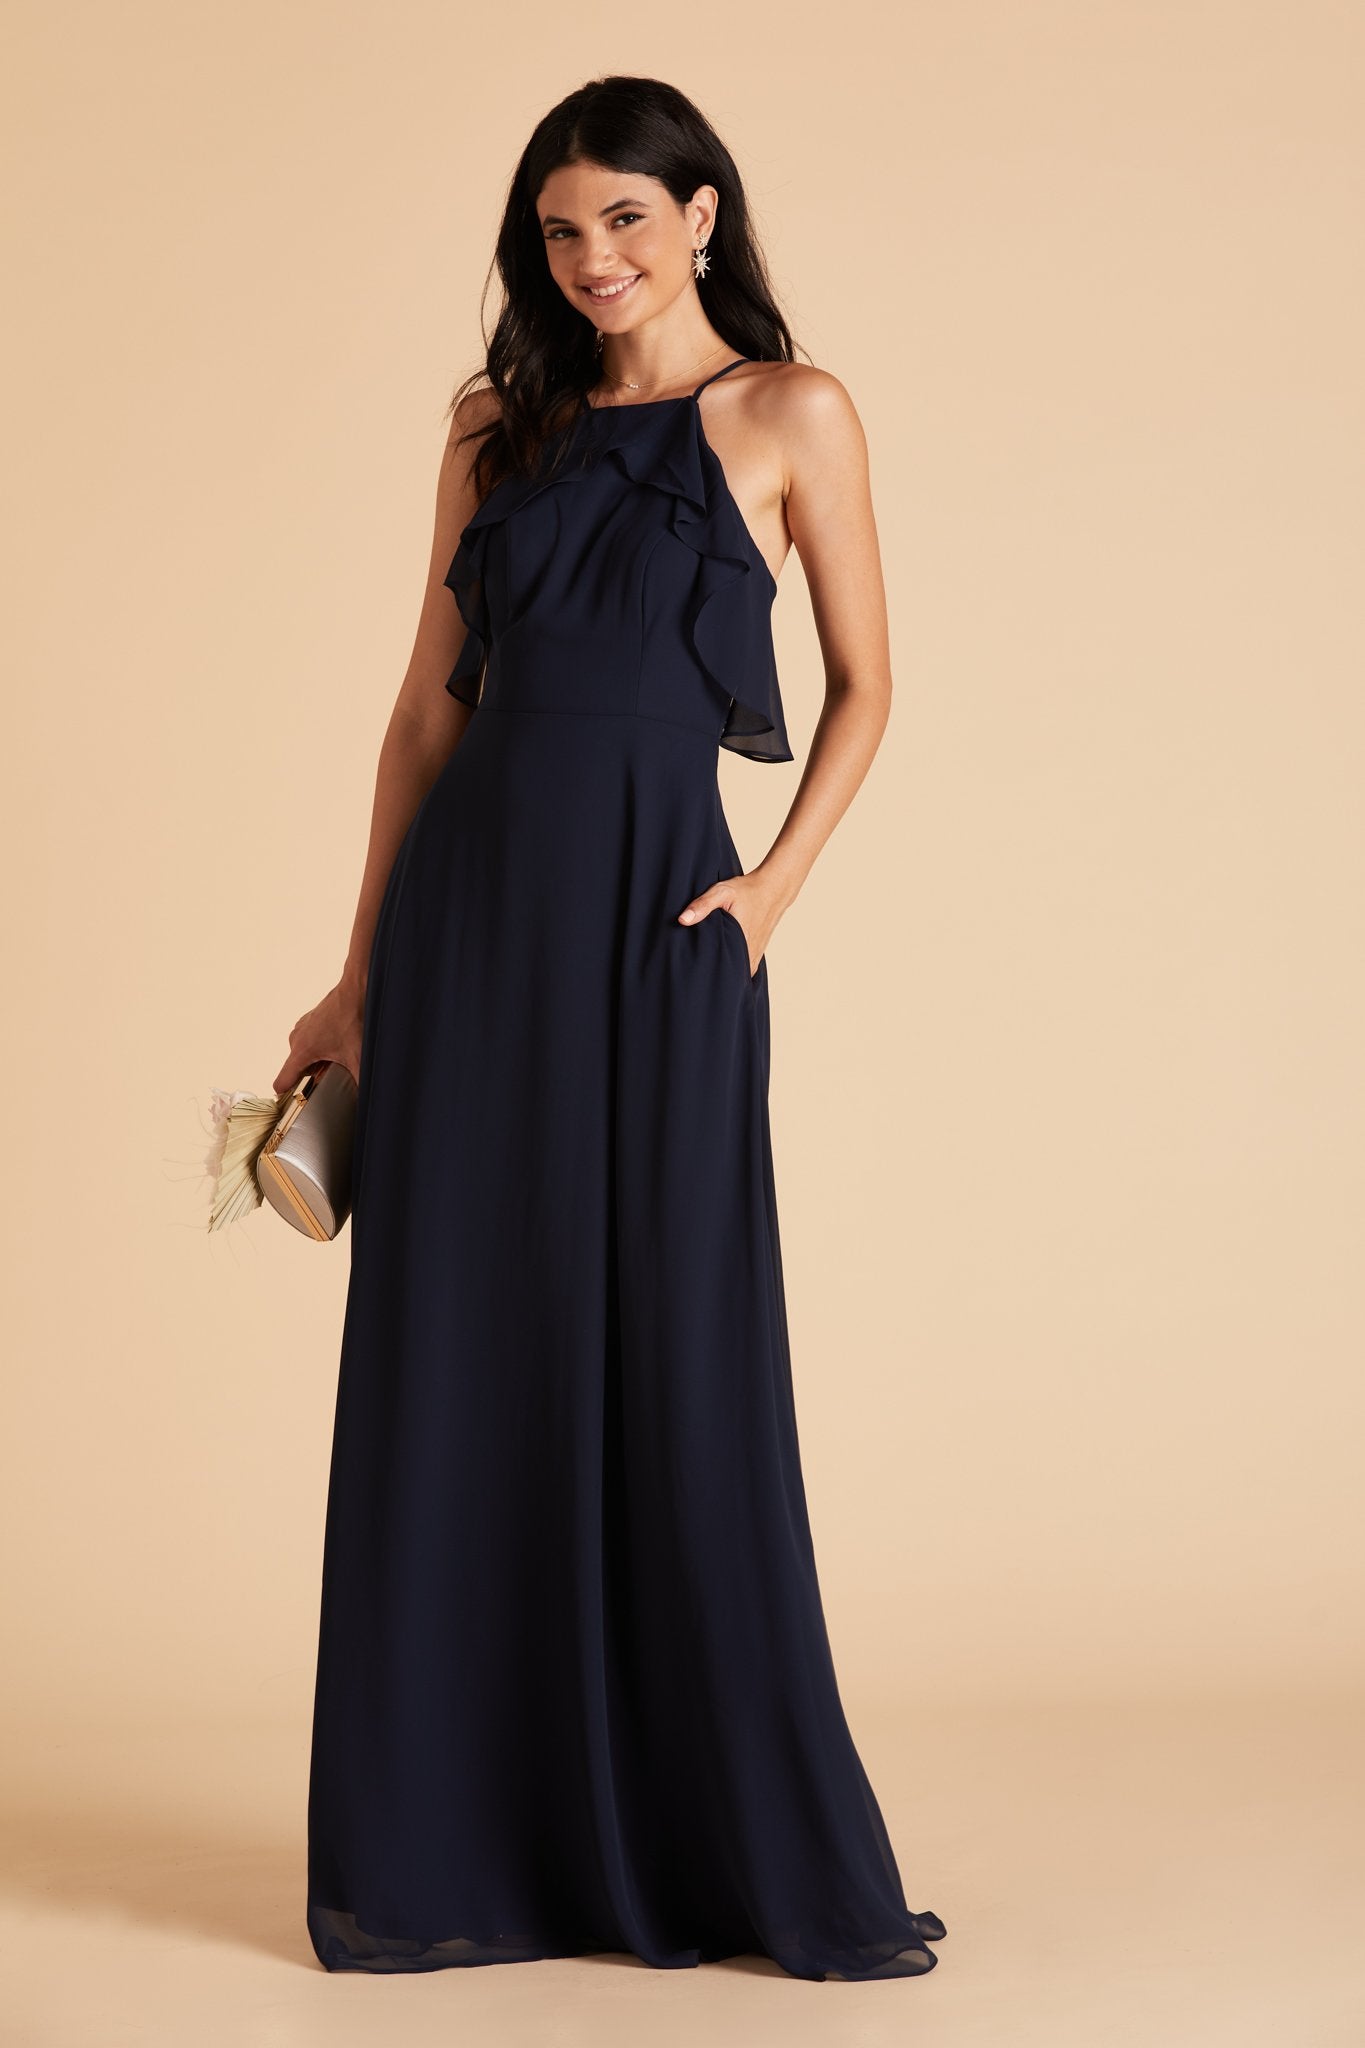 Jules bridesmaid dress in navy blue chiffon by Birdy Grey, front view